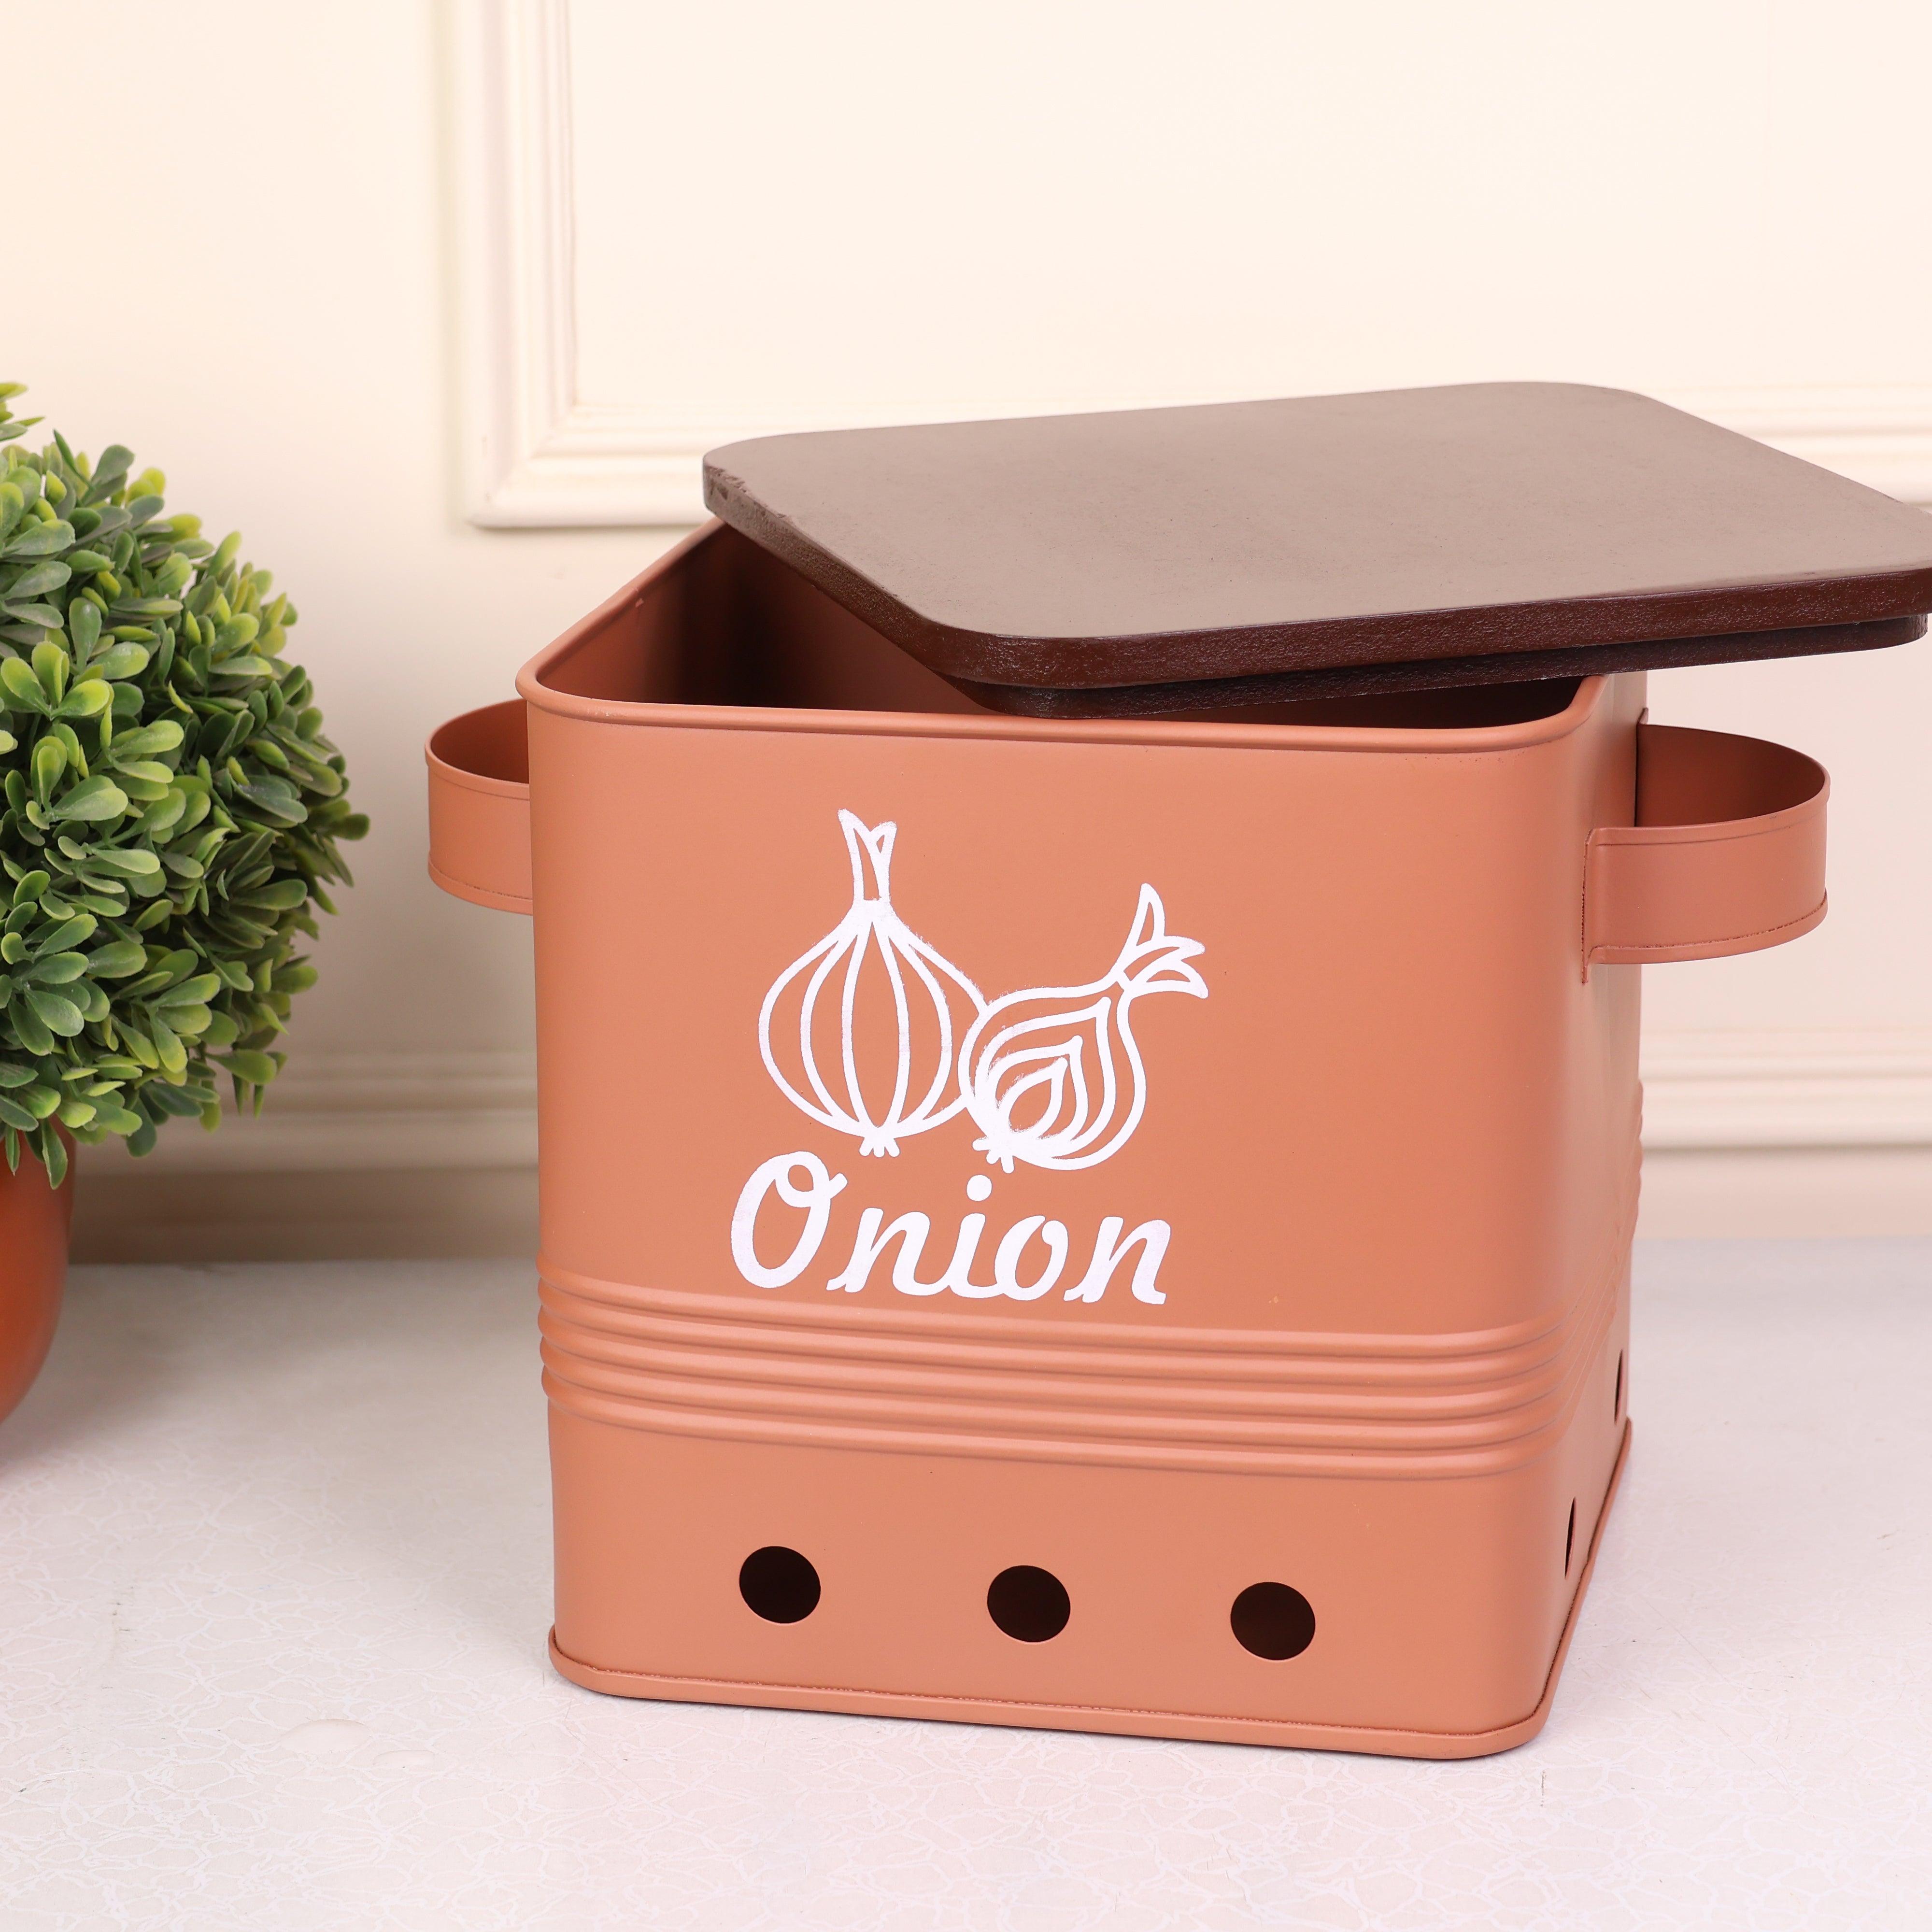 Square onion box with wooden lid